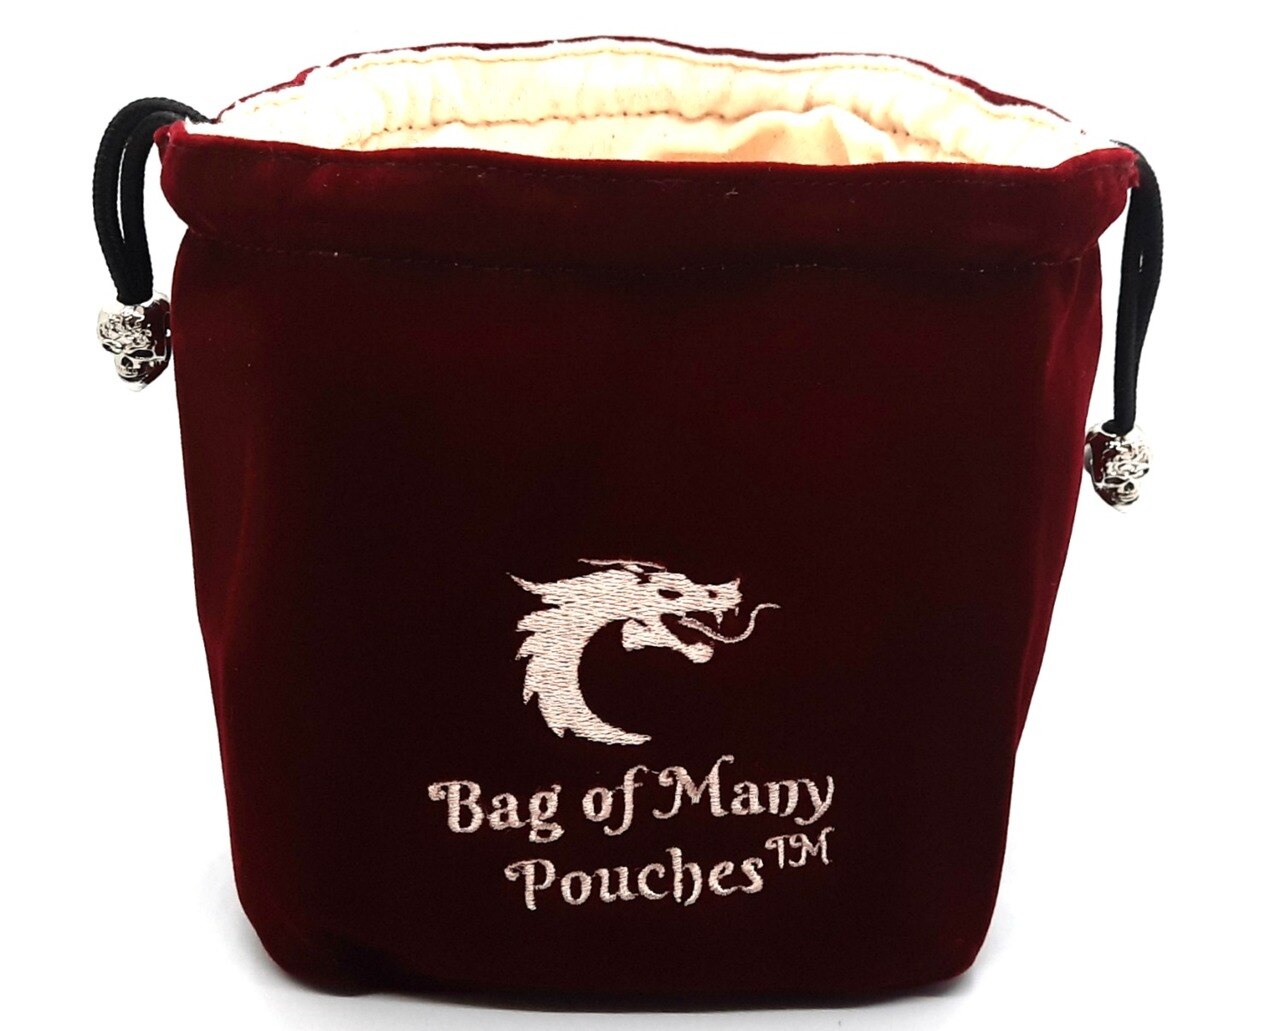 Bag of Many Pouches: Wine